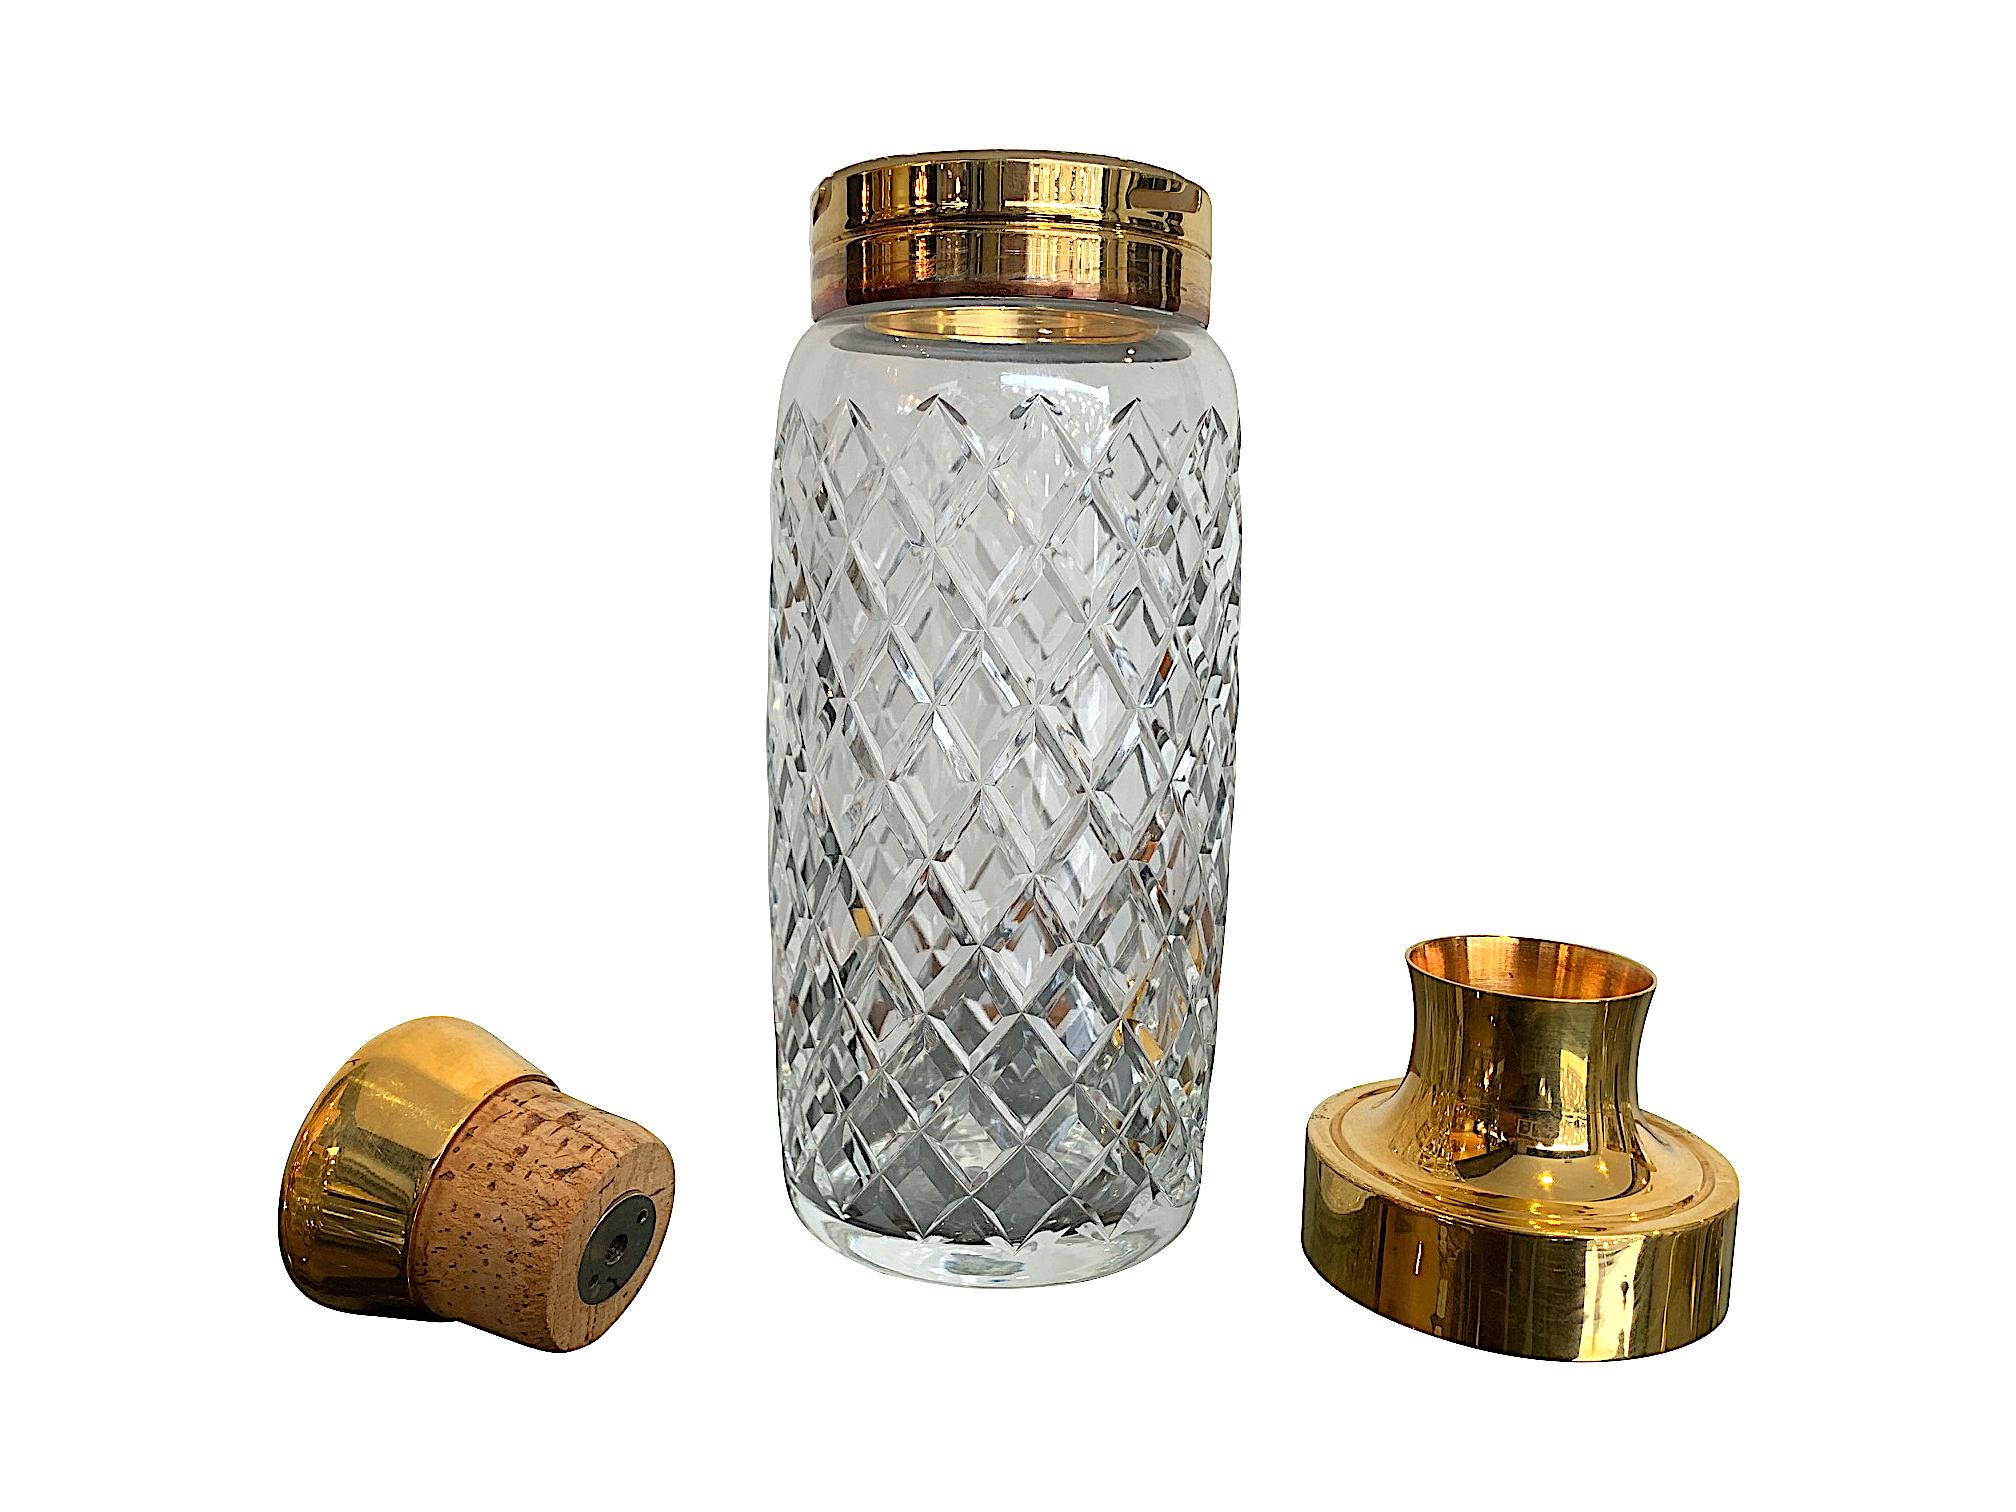 A 1950s crystal and gilt cocktail set with cocktail Shaker with removable top and lid with cork stopper. With six matching crystal gilt edged tumblers decorated with Greek key design. A lovely gift set for any cocktail lover.